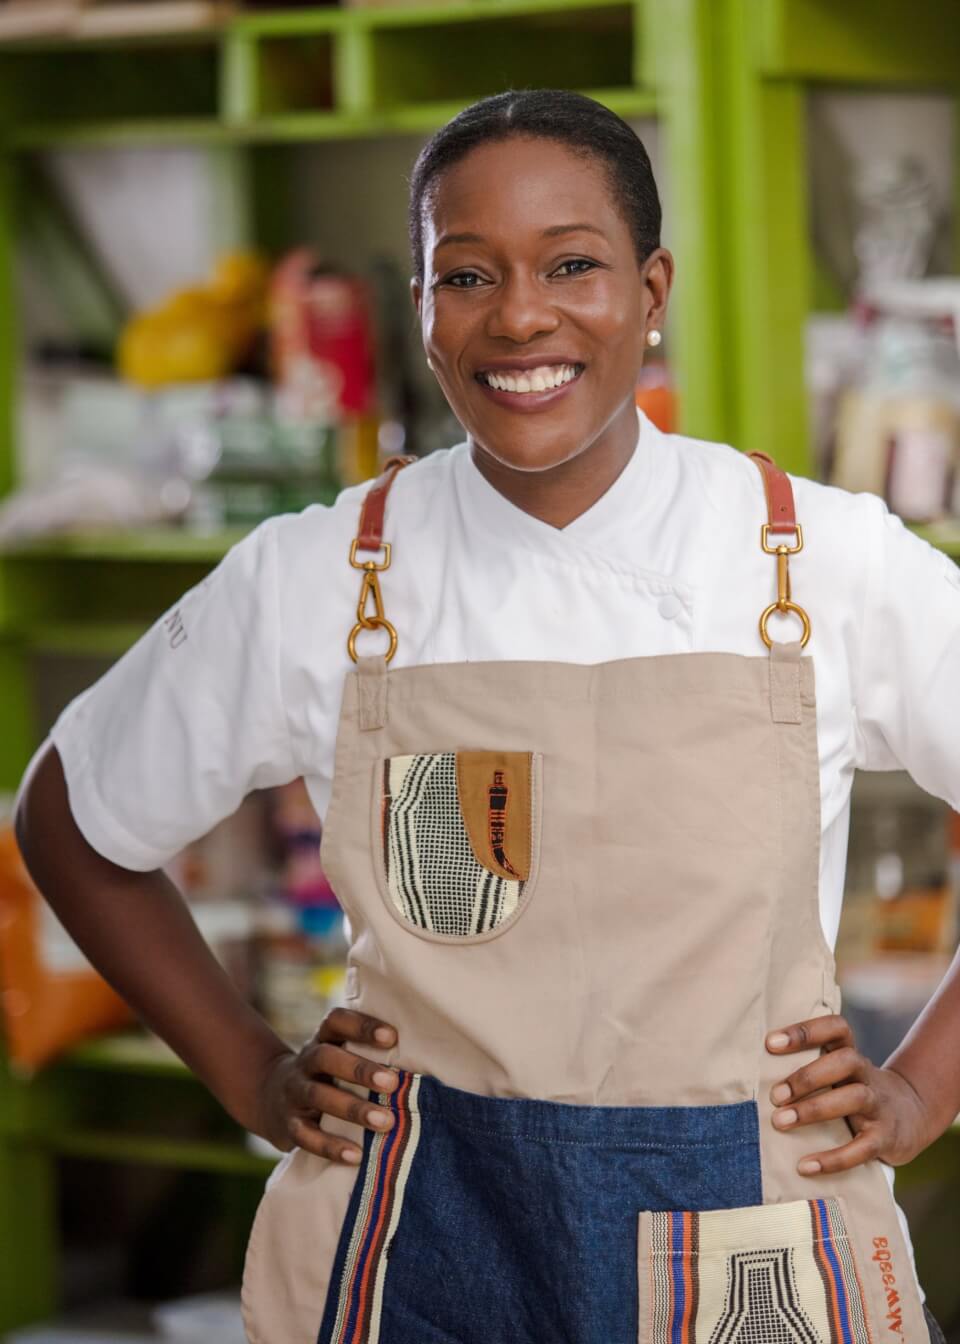 A woman, Selassie Atadika, wears a tan apron and smiles at the camera with her hands on her hips